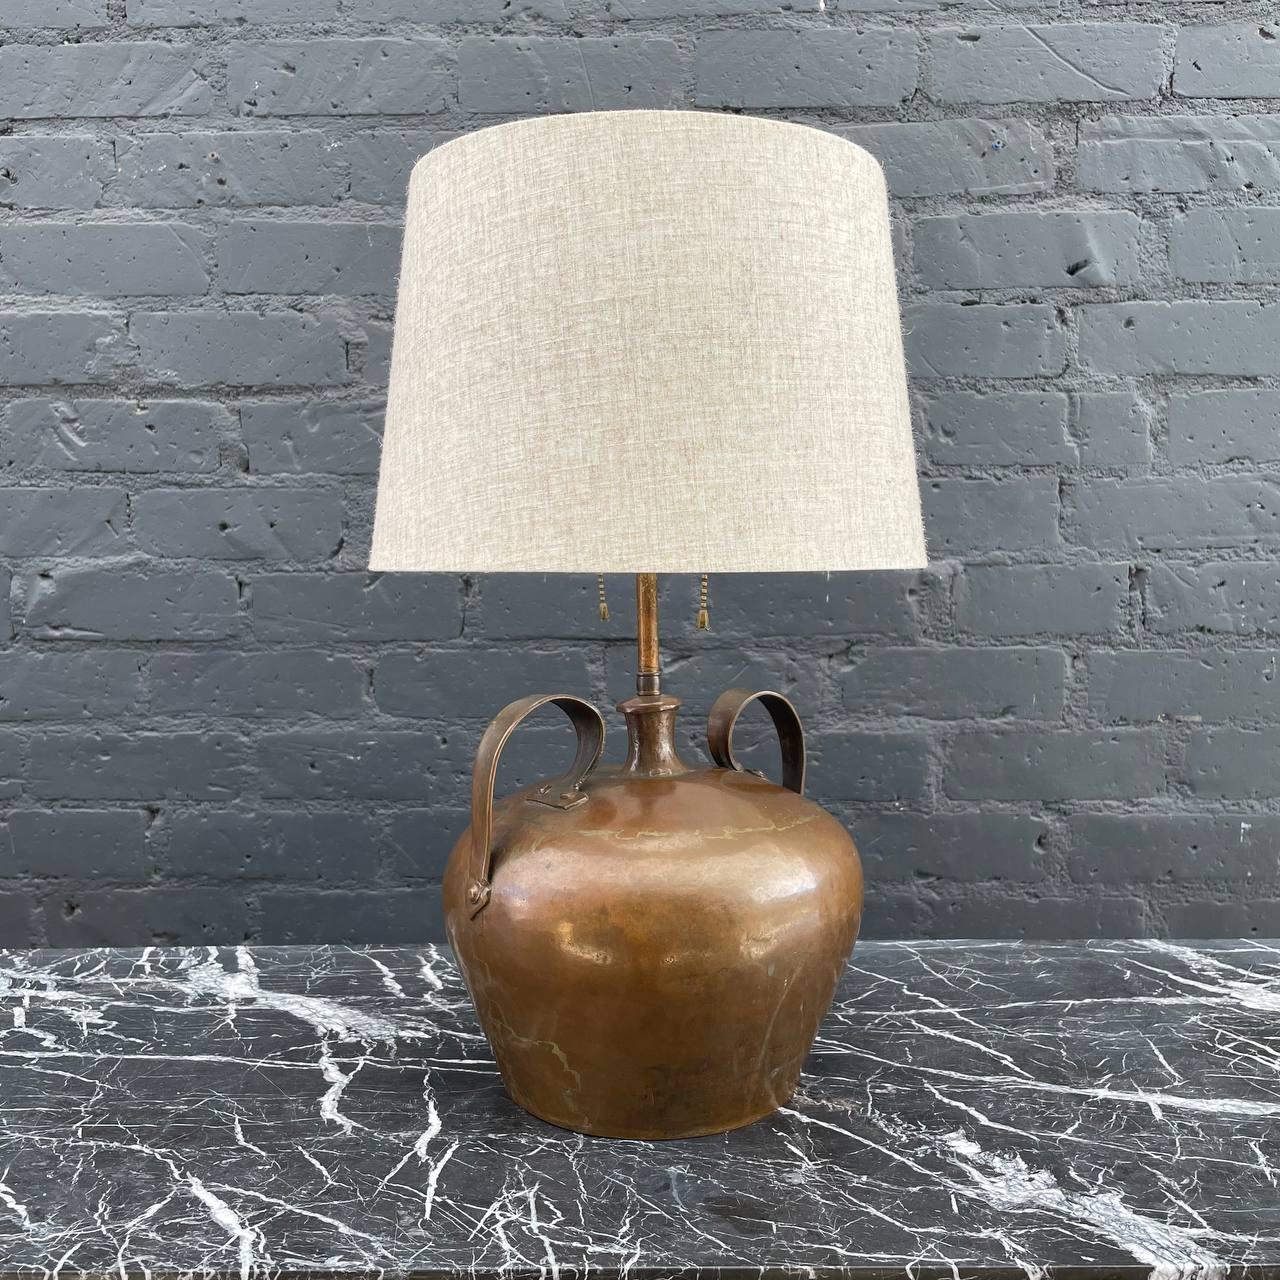 Antique Hammered Copper Urn Style Table Lamp

Country: United States
Materials:  Copper
Condition: Newly Rewired
Style: American Antique
Year: 1920’s

$1,450 

Dimensions:
21”H x 10”W x 10”D